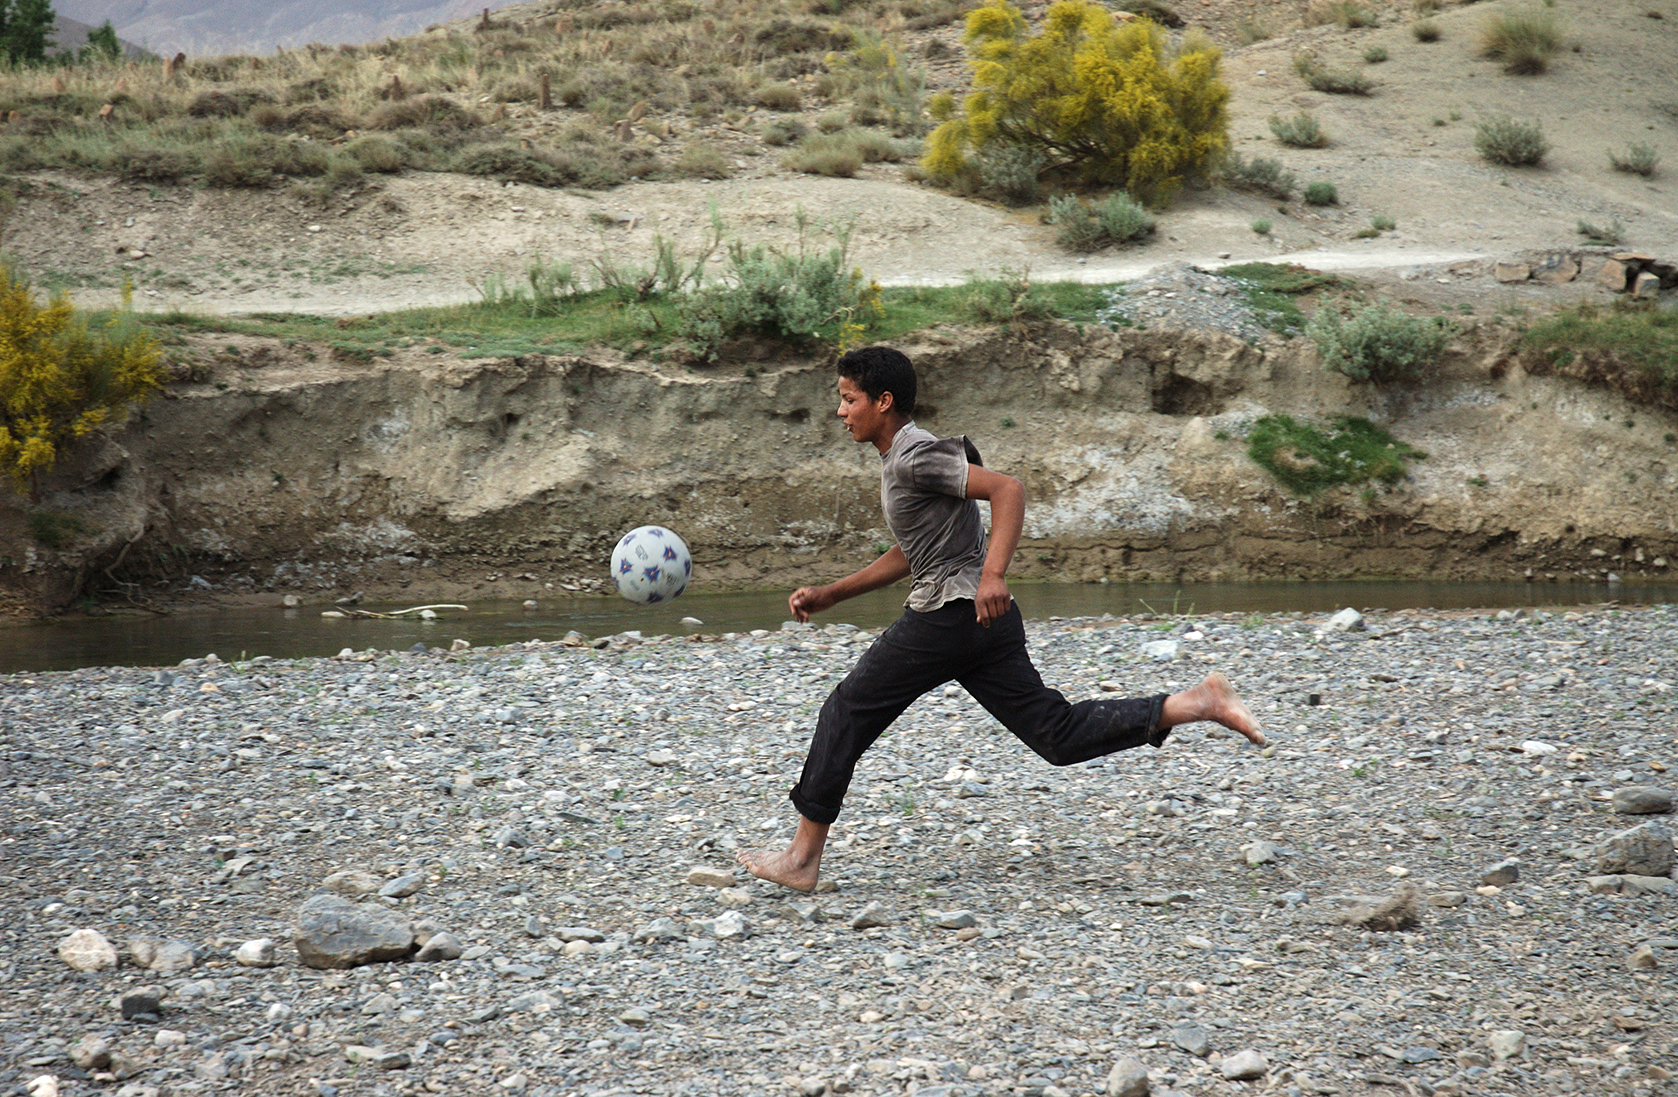  Playing soccer on the dry river bed. 